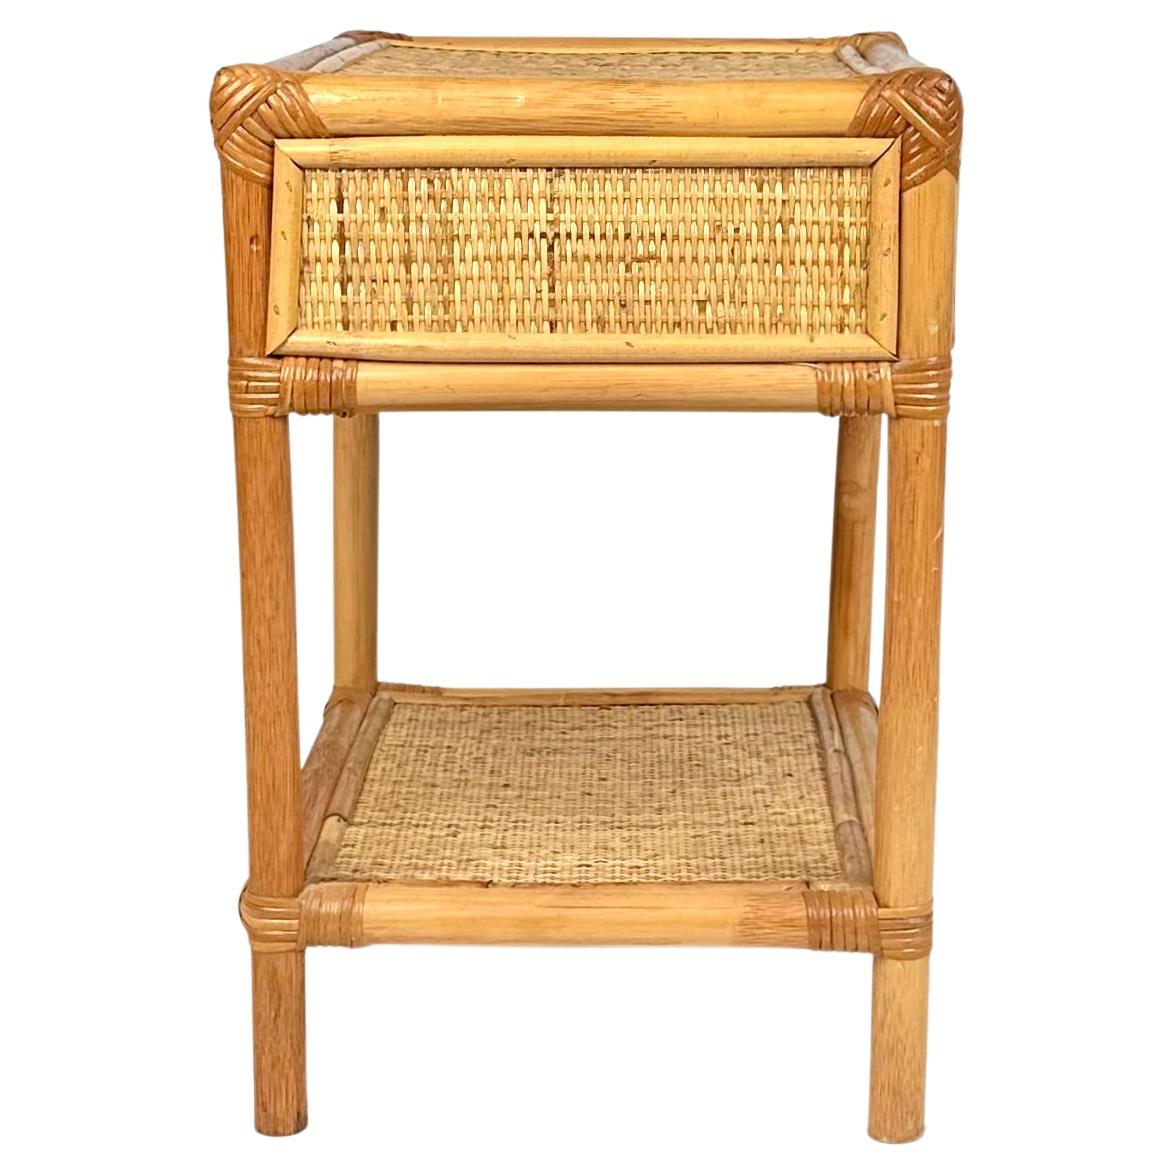 Midcentury Bedside Table Nightstand in Bamboo & Rattan, Italy, 1970s For Sale 3